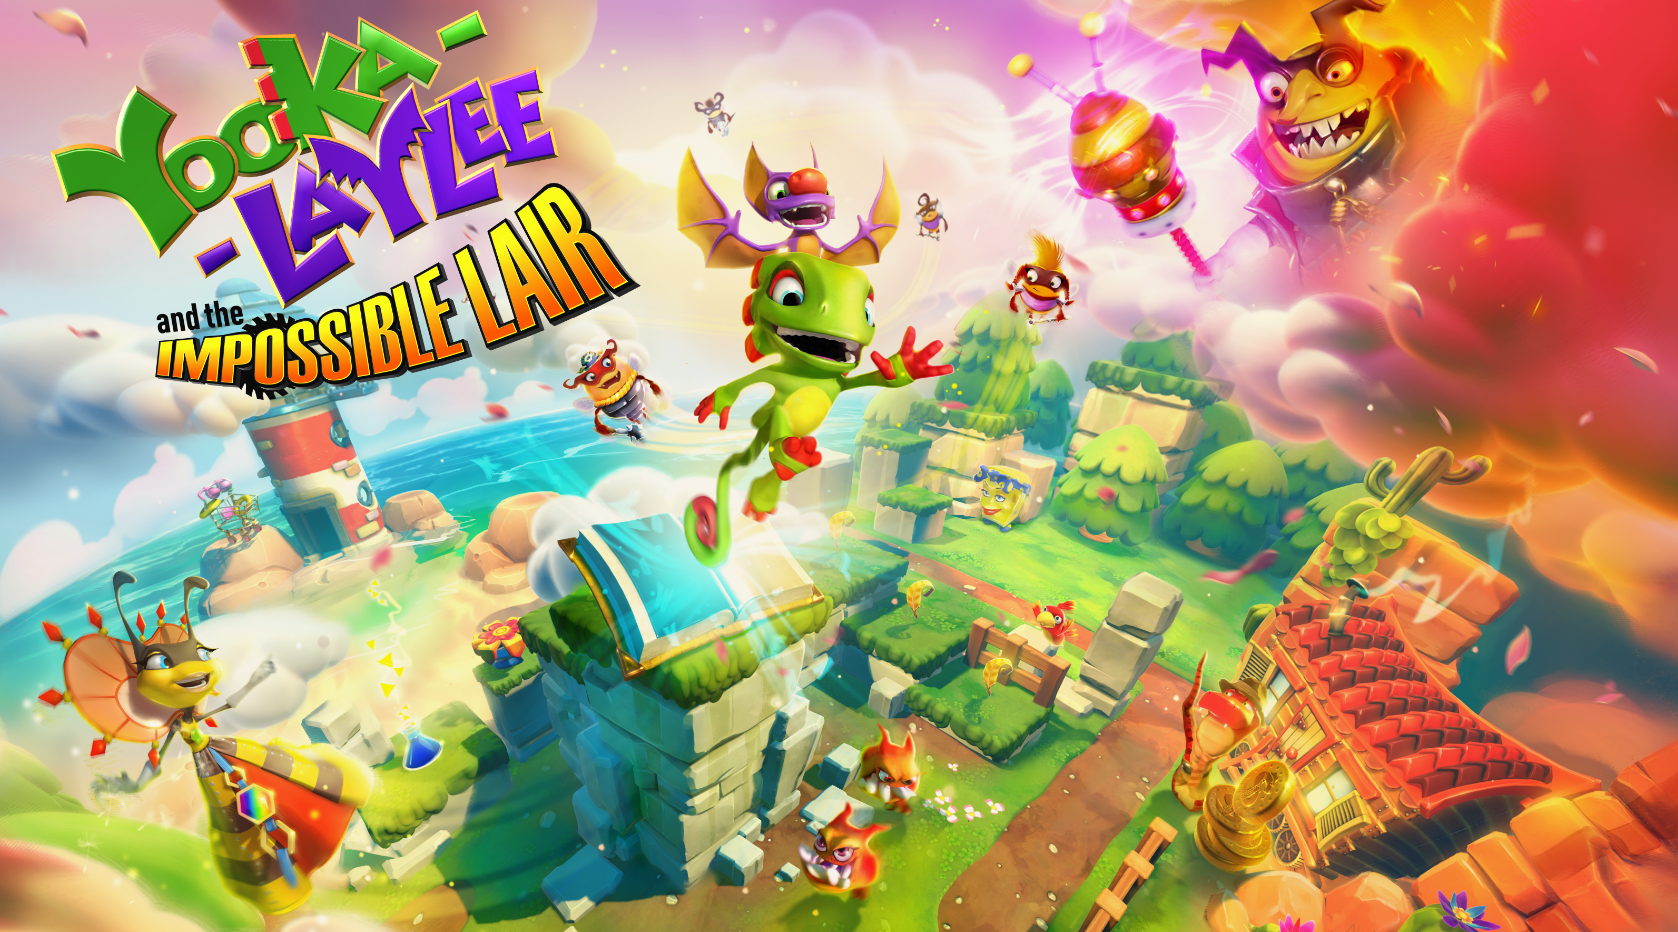 E3 2019: Playtonic Game announce Yooka-Laylee and the Impossible Lair